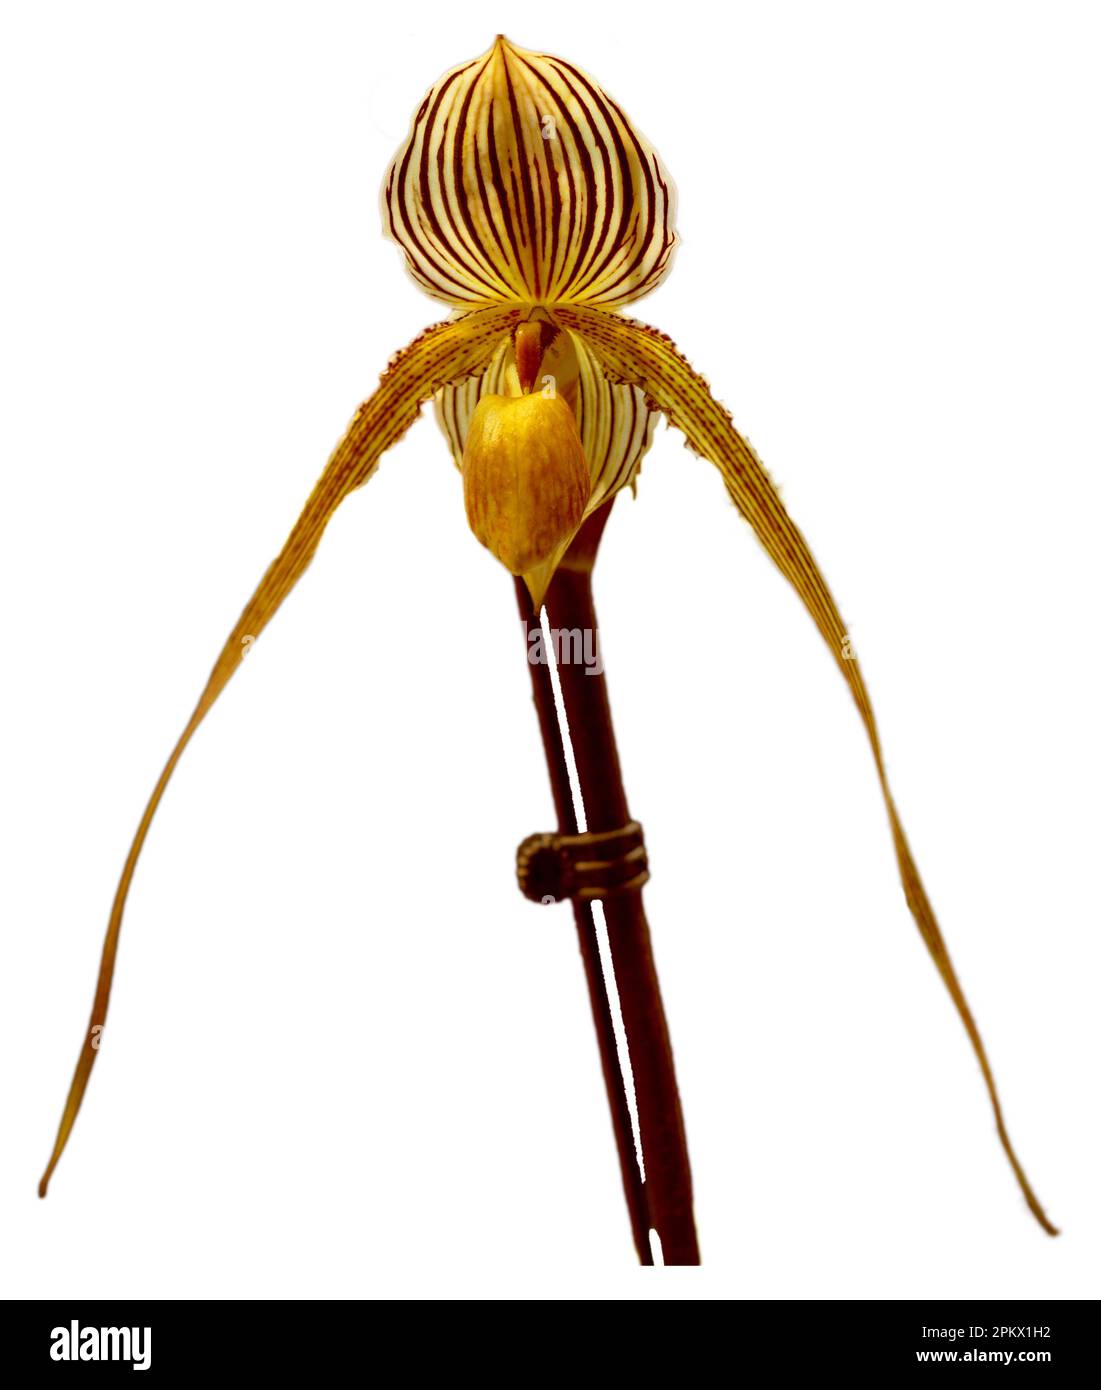 Flower colors are yellow, white and brown. An orchid of the genus Paphiopedilum. Close-up of isolated beautiful plant. Stock Photo